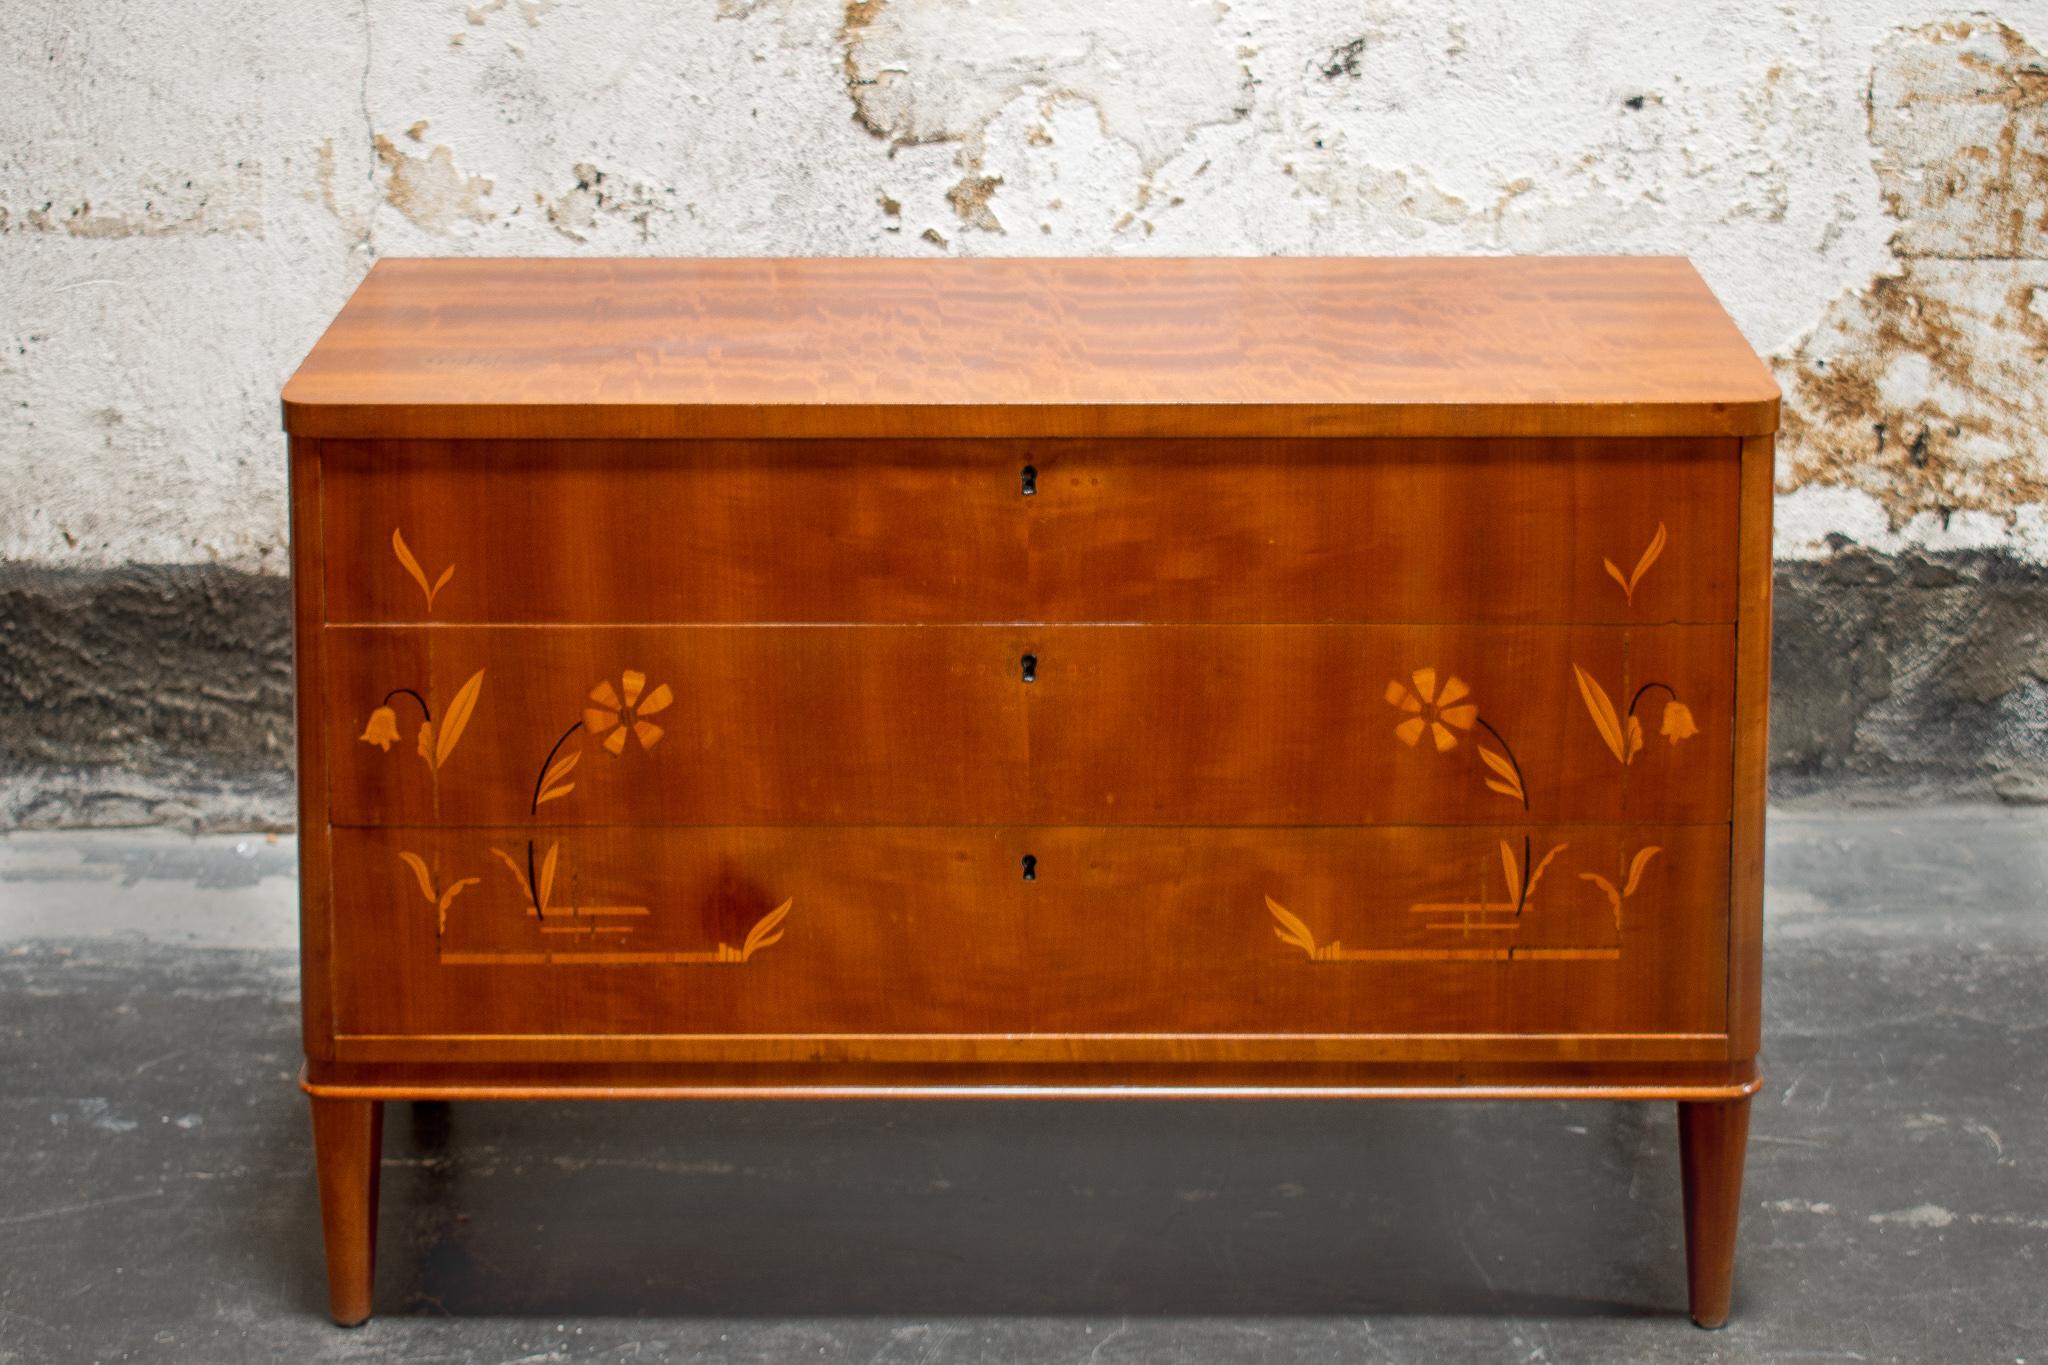 Swedish Art Moderne chest of drawers made of mahogany with rosewood Intarsia inlay in a floral motif. Unique piece in very good vintage condition. Three drawers with ample storage, key included.